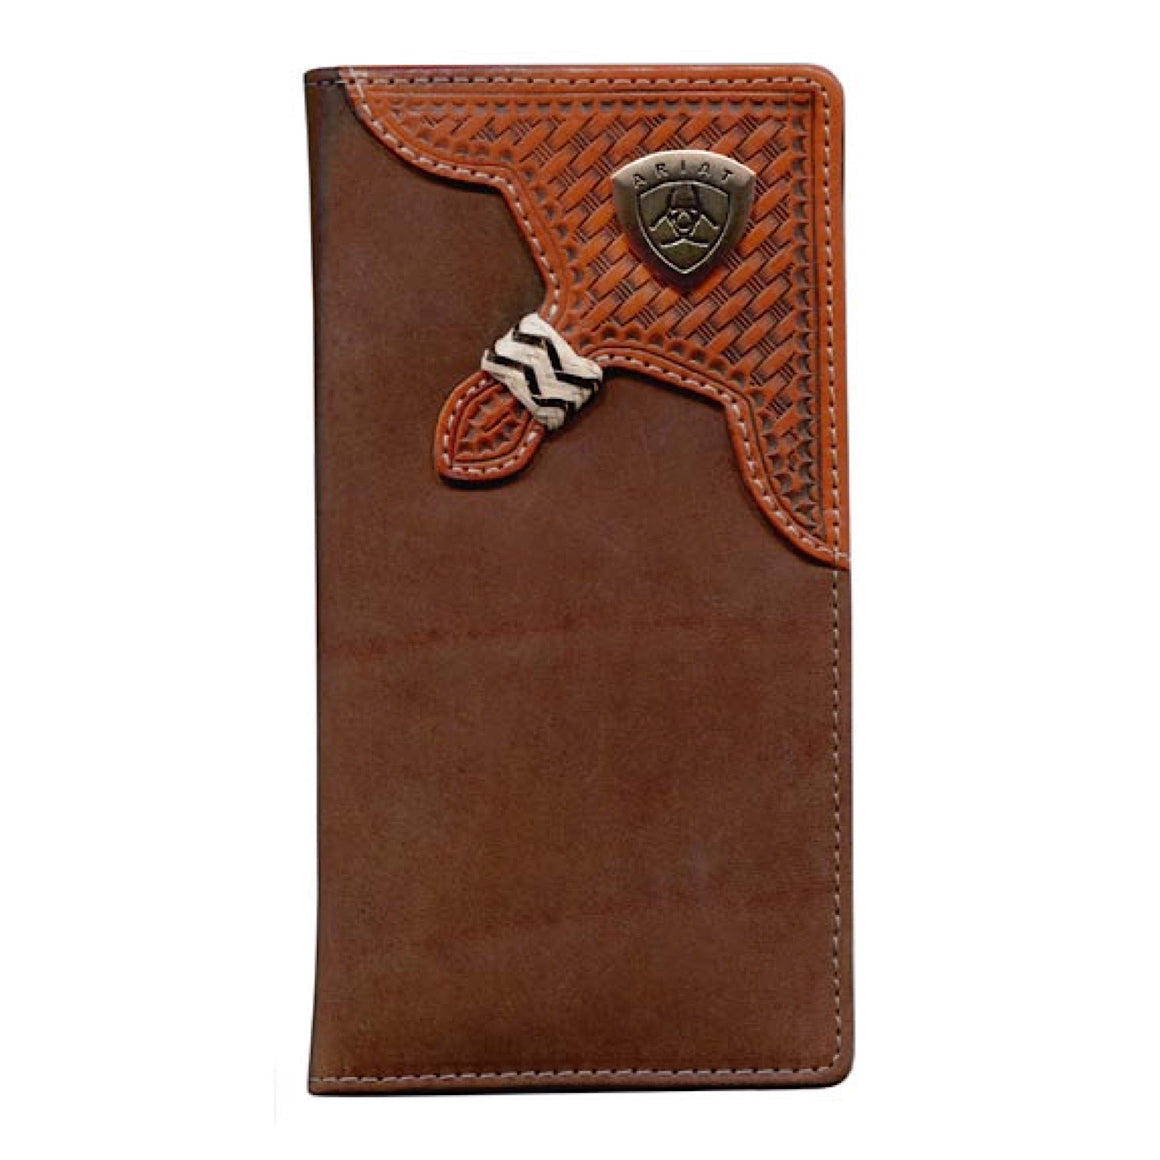 Ariat Rodeo Wallet Brown WLT1111A